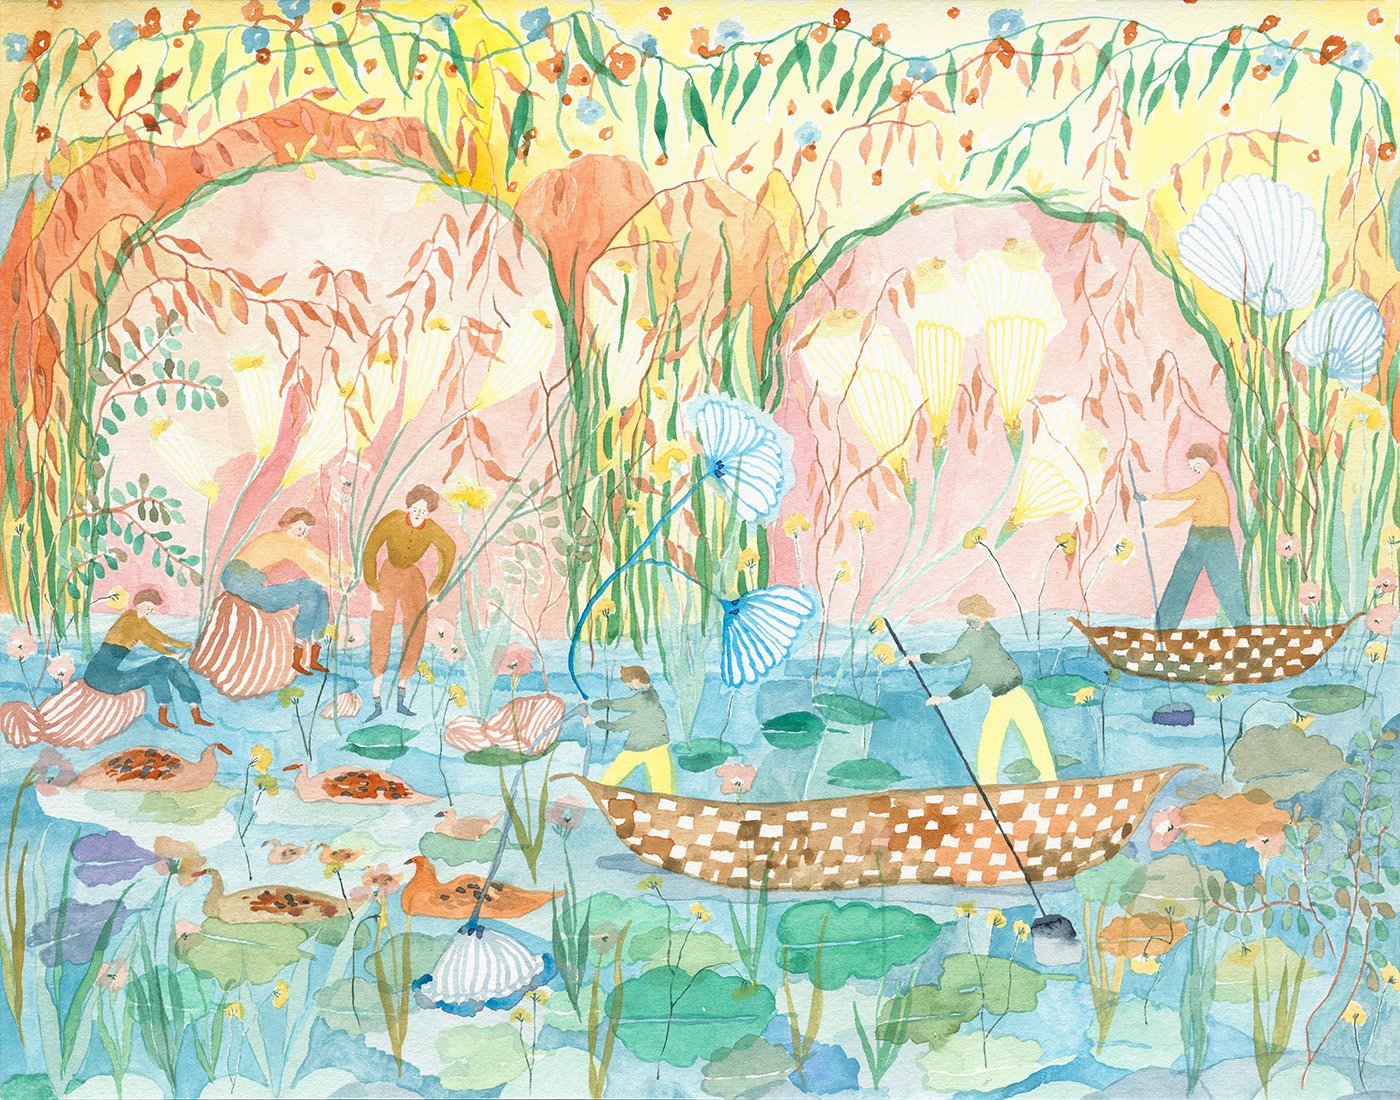   The Lily Pond, detail   Watercolor on paper, 2021  11” x 14”  Sold 